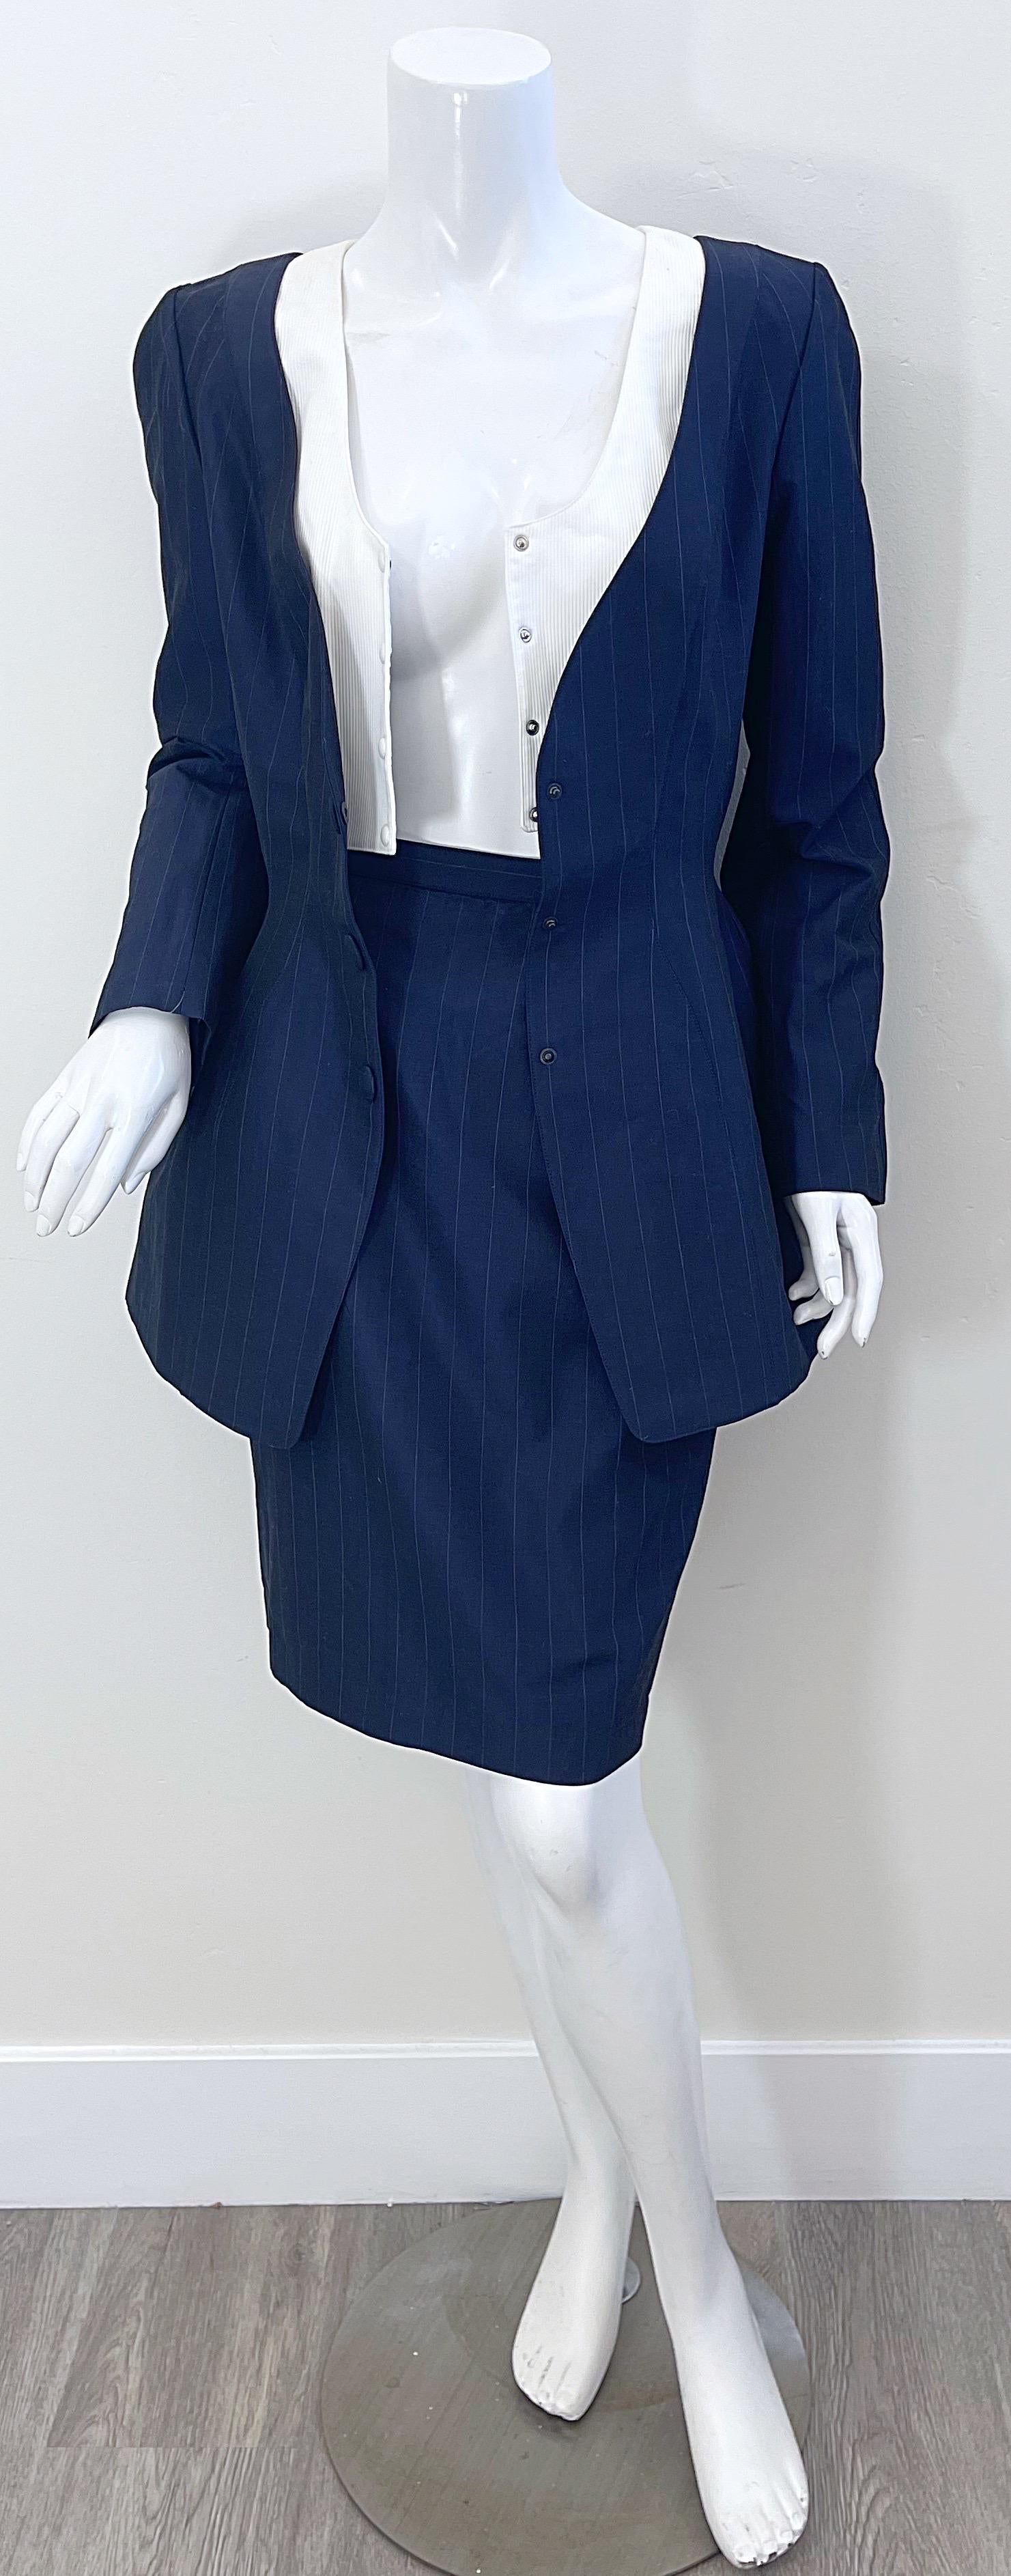 NWT 1990s Thierry Mugler Navy Blue Pinstripe Size 4 Vintage 90s Skirt Suit For Sale 3